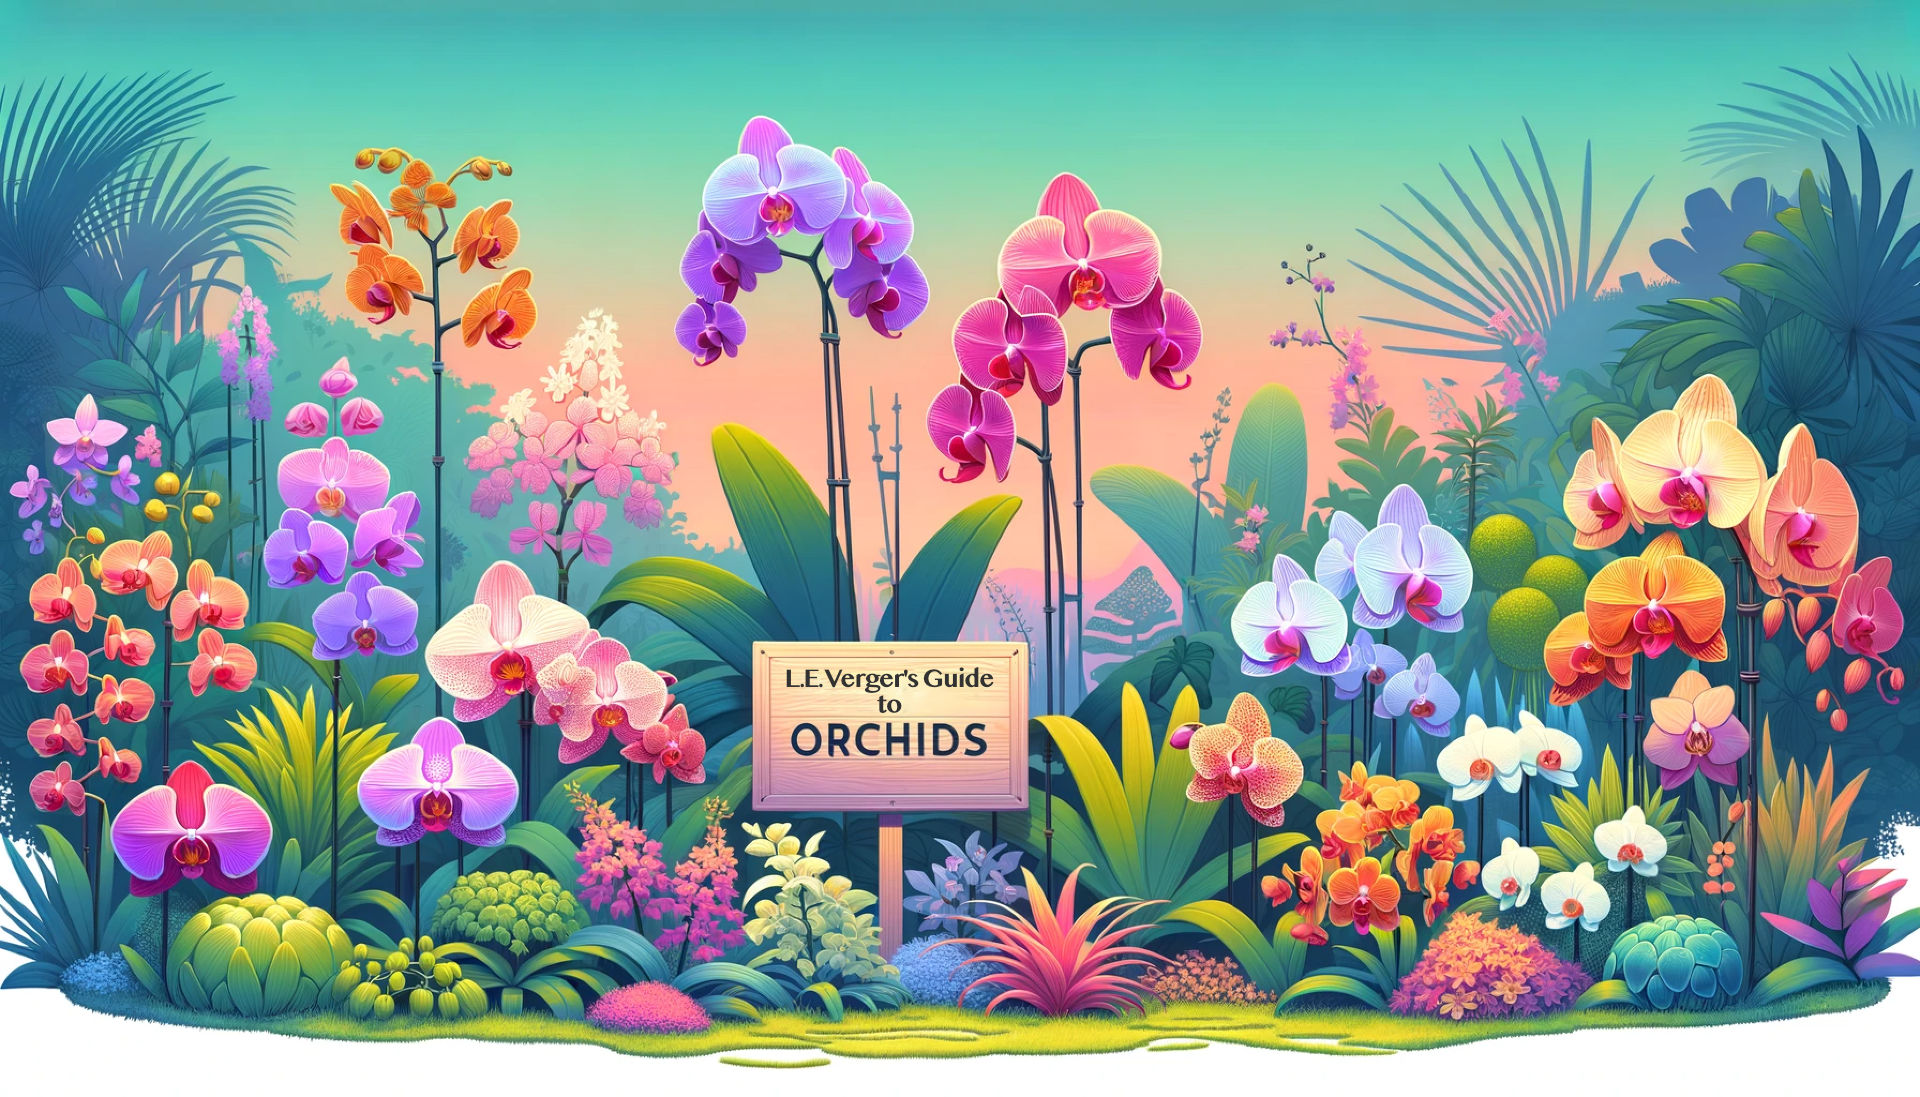 Illustration of a vibrant garden scene showcasing various orchids in different colours, shapes, and sizes. The background features a gentle gradient of soft pastel colours, symbolising dawn or dusk. A wooden sign in the foreground reads 'L.E. Verger's Guide to Orchids'.